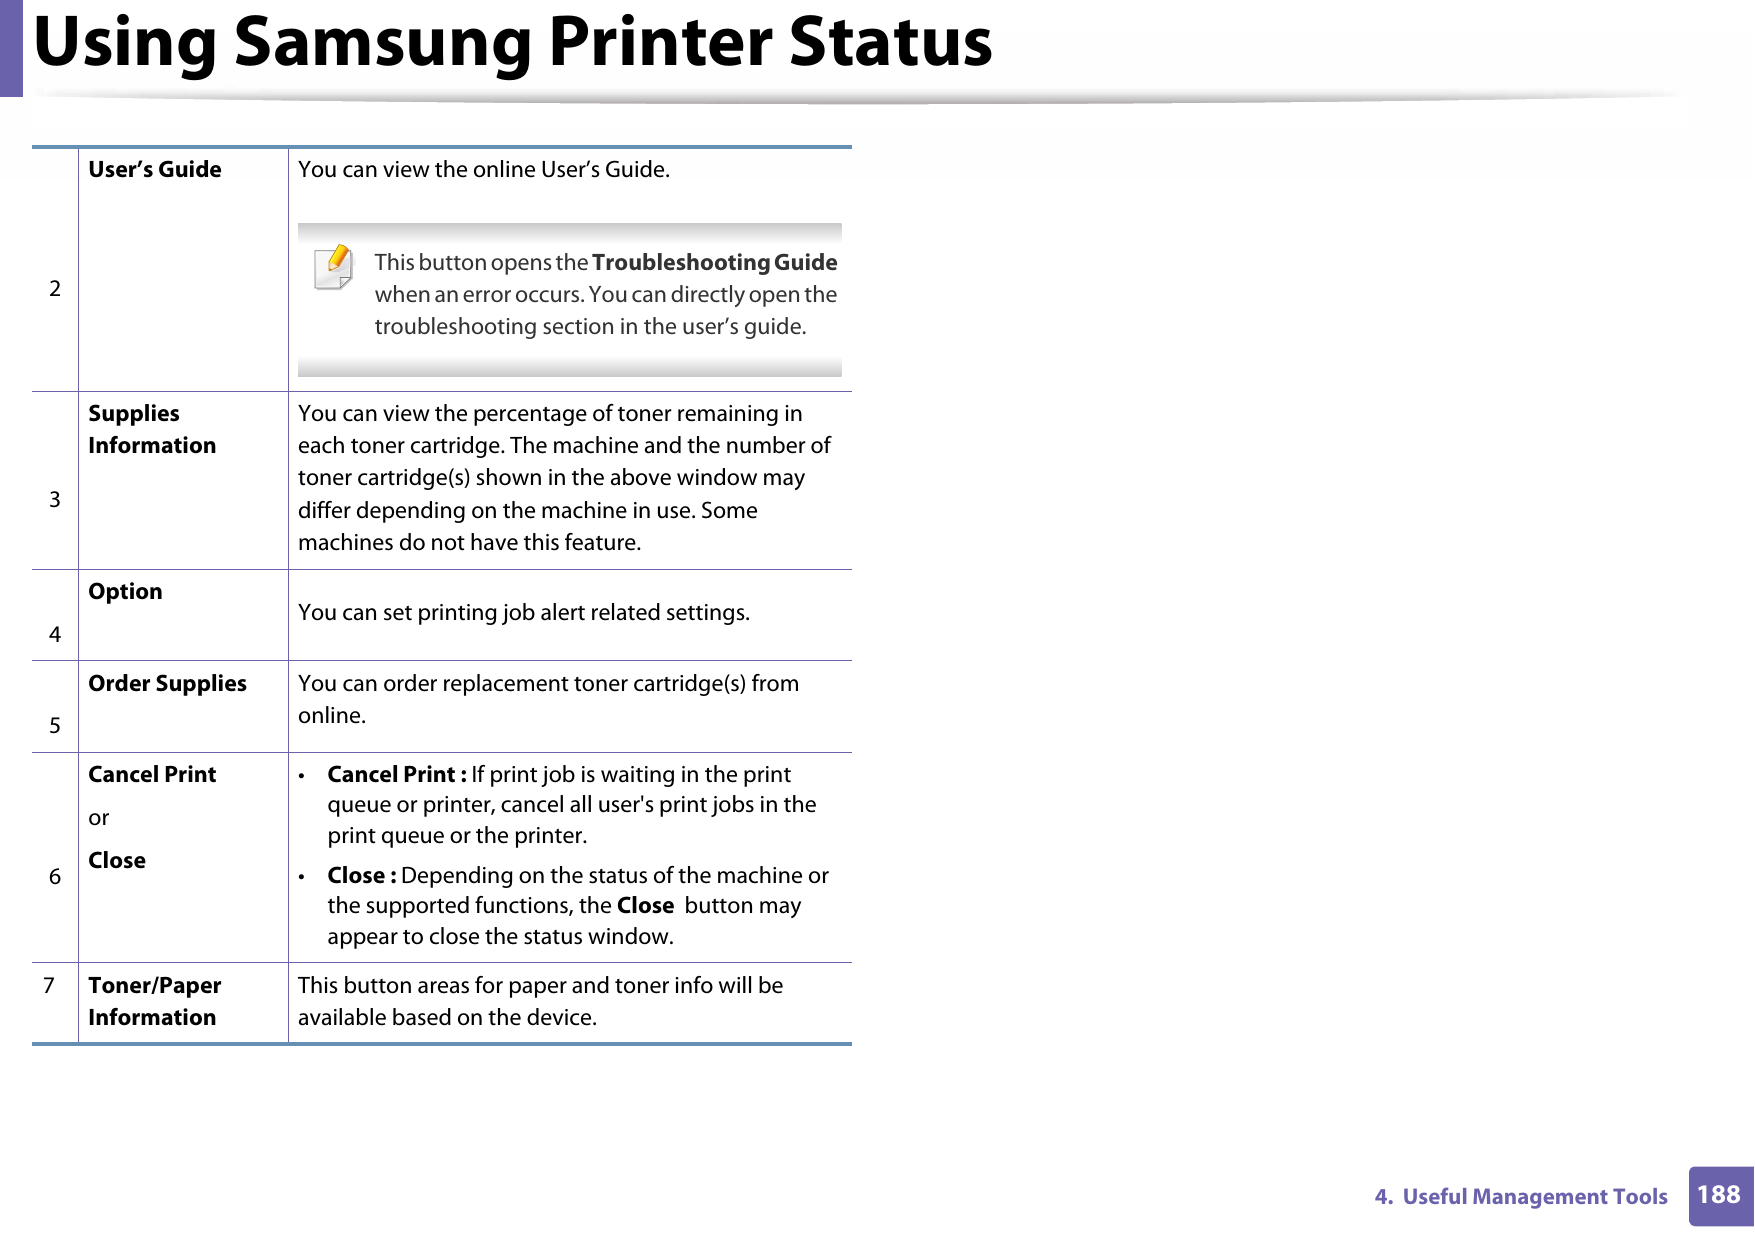 Using Samsung Printer Status1884.  Useful Management Tools2User’s Guide You can view the online User’s Guide. This button opens the Troubleshooting Guide when an error occurs. You can directly open the troubleshooting section in the user’s guide. 3Supplies InformationYou can view the percentage of toner remaining in each toner cartridge. The machine and the number of toner cartridge(s) shown in the above window may differ depending on the machine in use. Some machines do not have this feature.4Option You can set printing job alert related settings.5Order Supplies You can order replacement toner cartridge(s) from online.6Cancel Print or Close•Cancel Print : If print job is waiting in the print queue or printer, cancel all user&apos;s print jobs in the print queue or the printer.•Close : Depending on the status of the machine or the supported functions, the Close  button may appear to close the status window.7Toner/Paper InformationThis button areas for paper and toner info will be available based on the device.